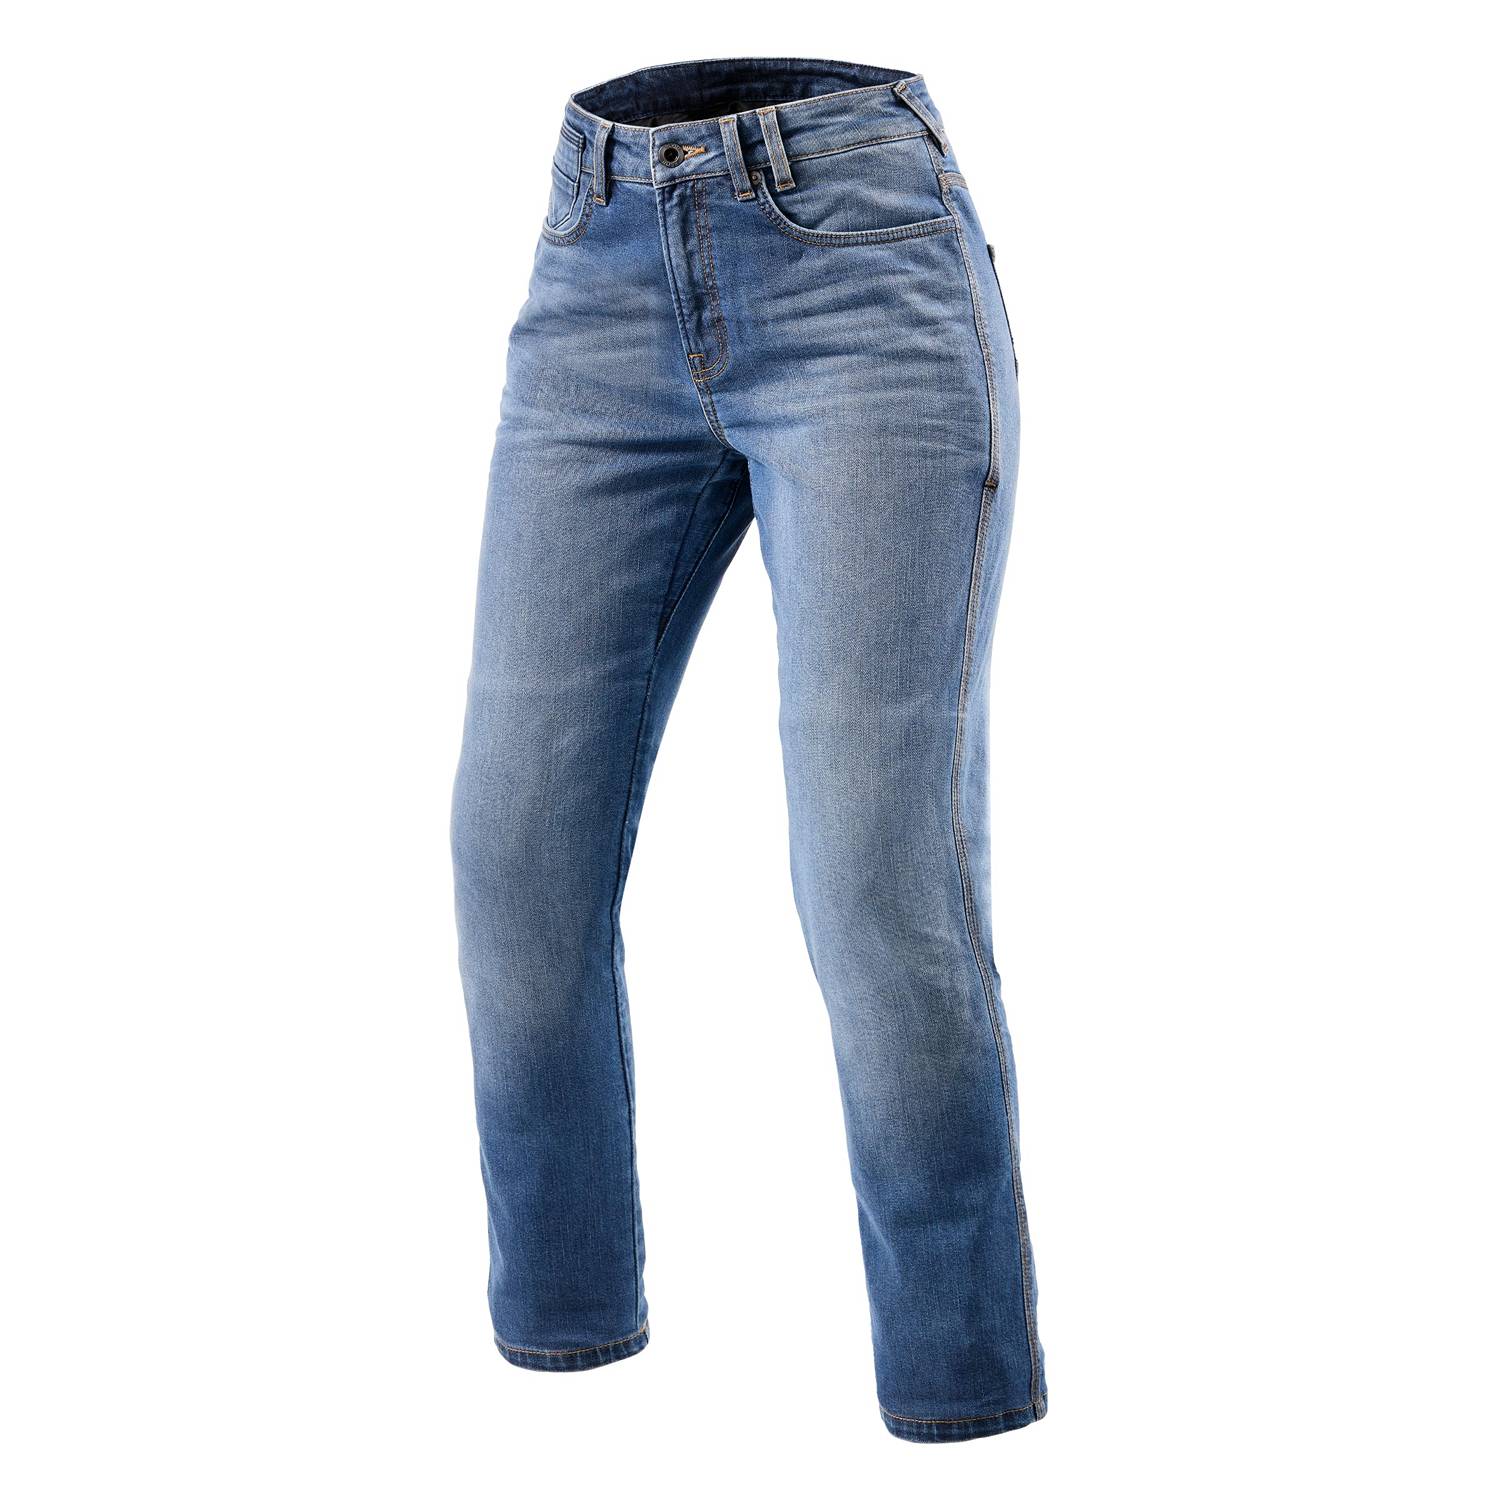 Image of REV'IT! Jeans Victoria 2 Ladies SF Classic Blue Used Motorcycle Jeans Size L32/W29 ID 8700001342834